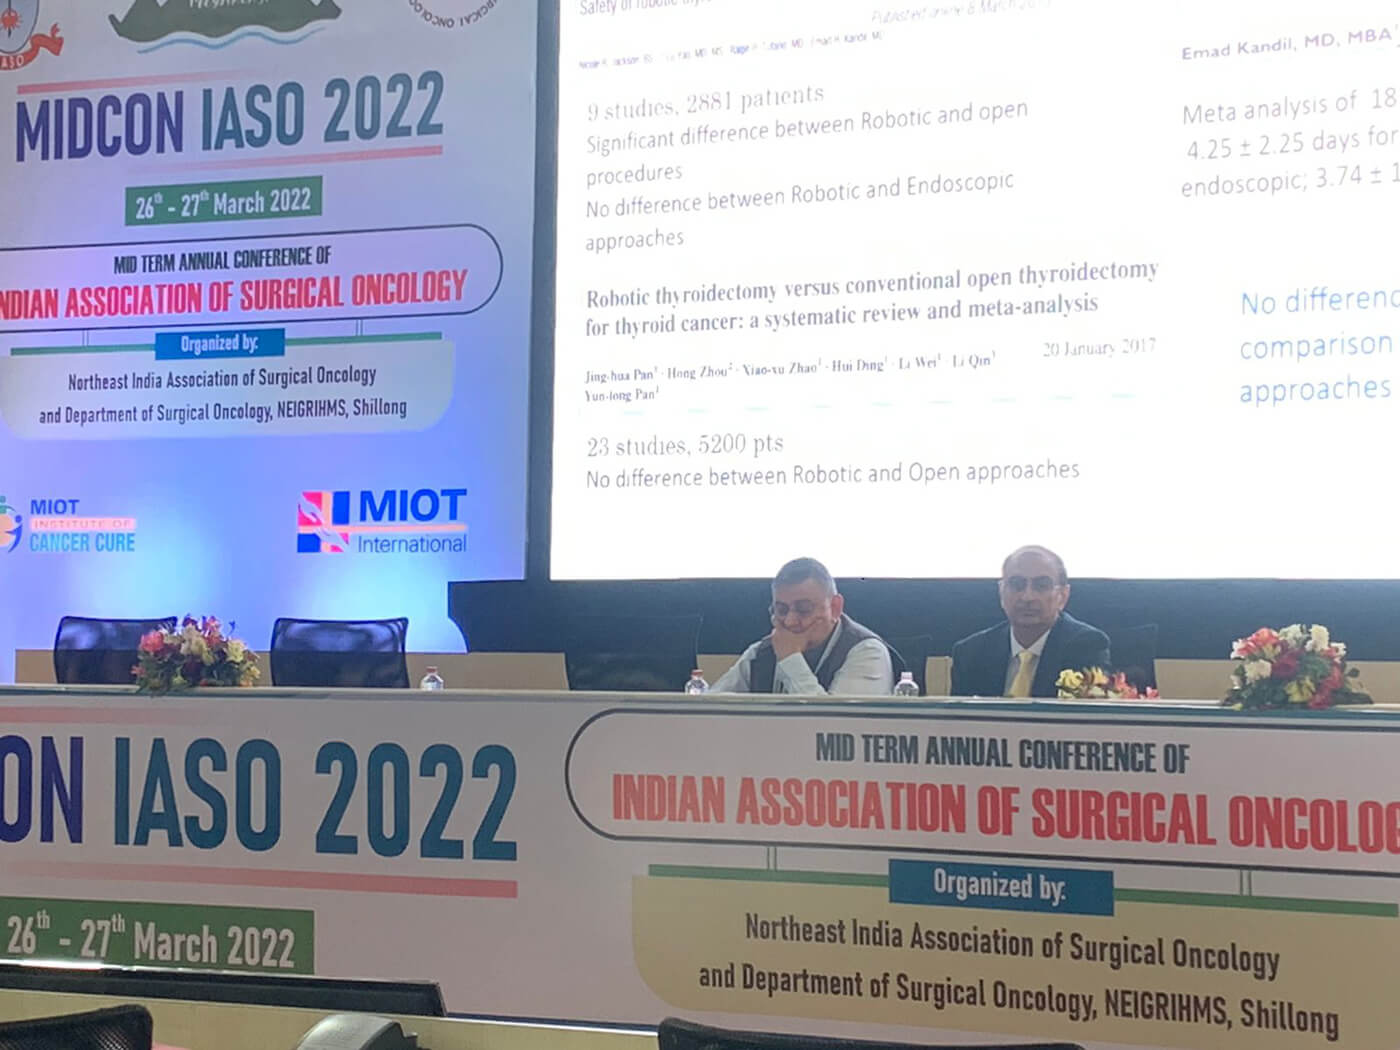 MID-TERM-ANNUAL-CONFERENCE-OF-INDIAN-ASSOCIATION-OF-SURGICAL-ONCOLOGY-2022-4